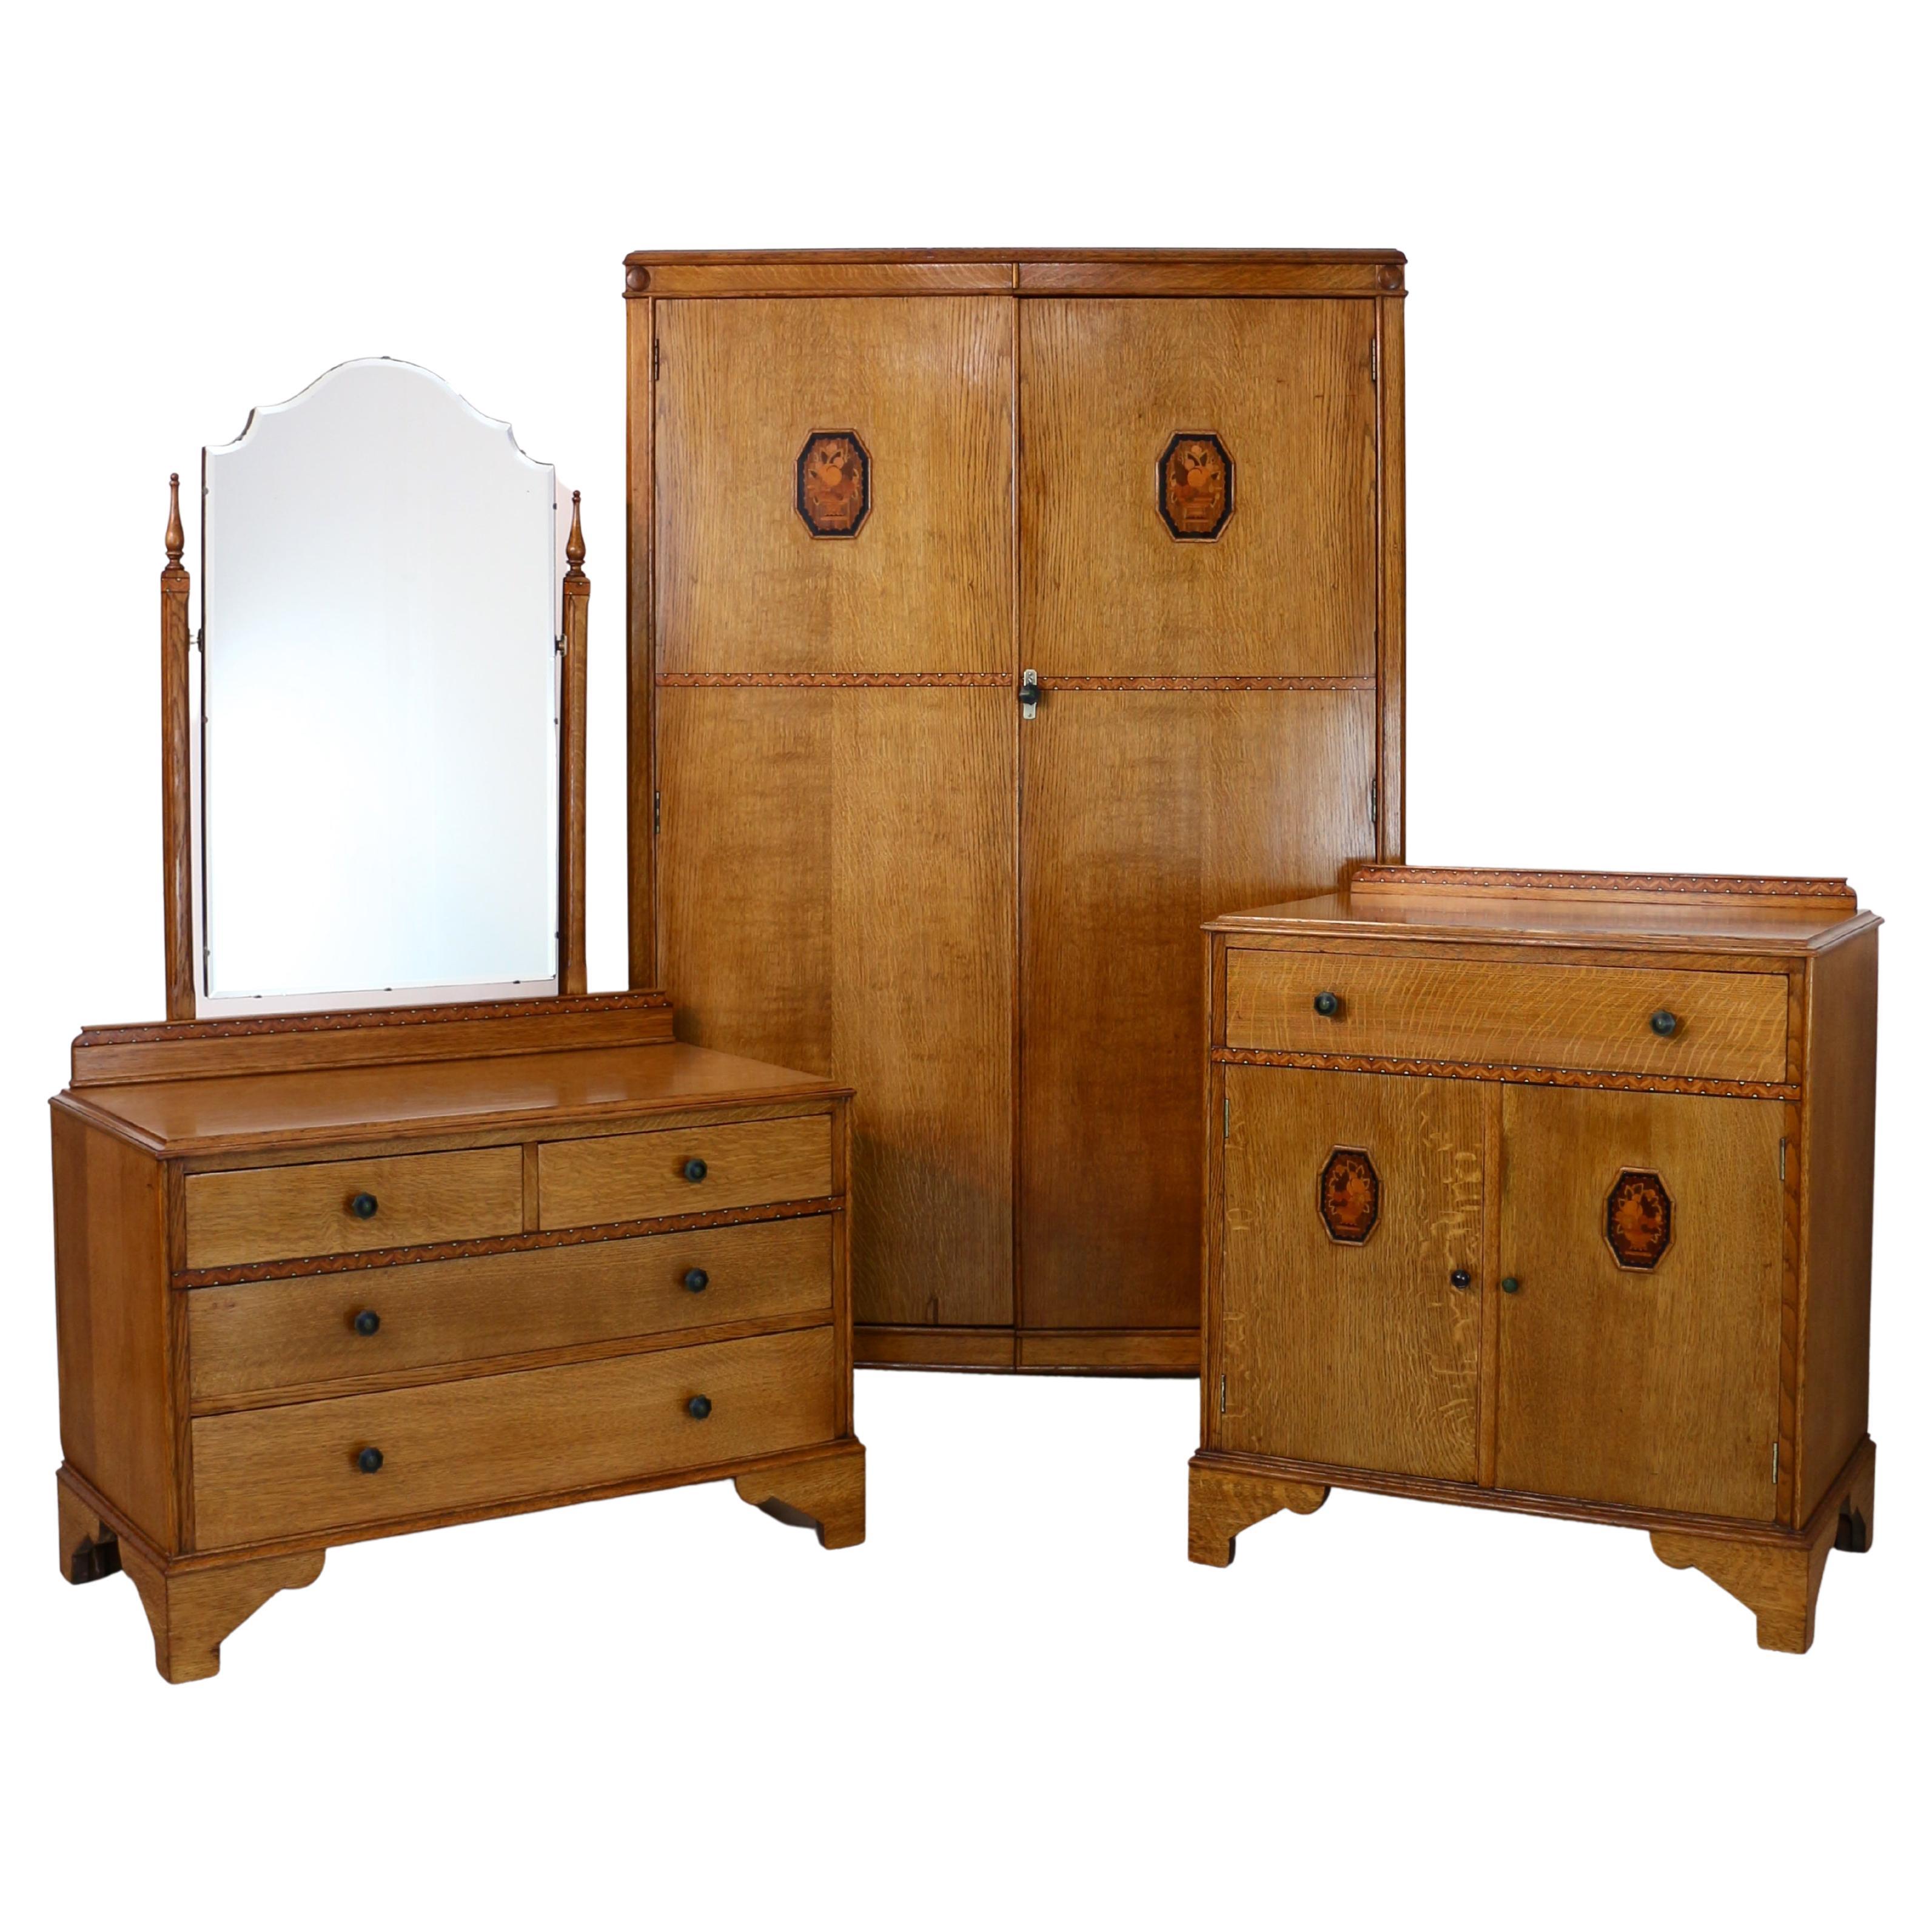 Antique English Art Deco Oak & Marquetry Bedroom Suite Attributed to Gaylayde